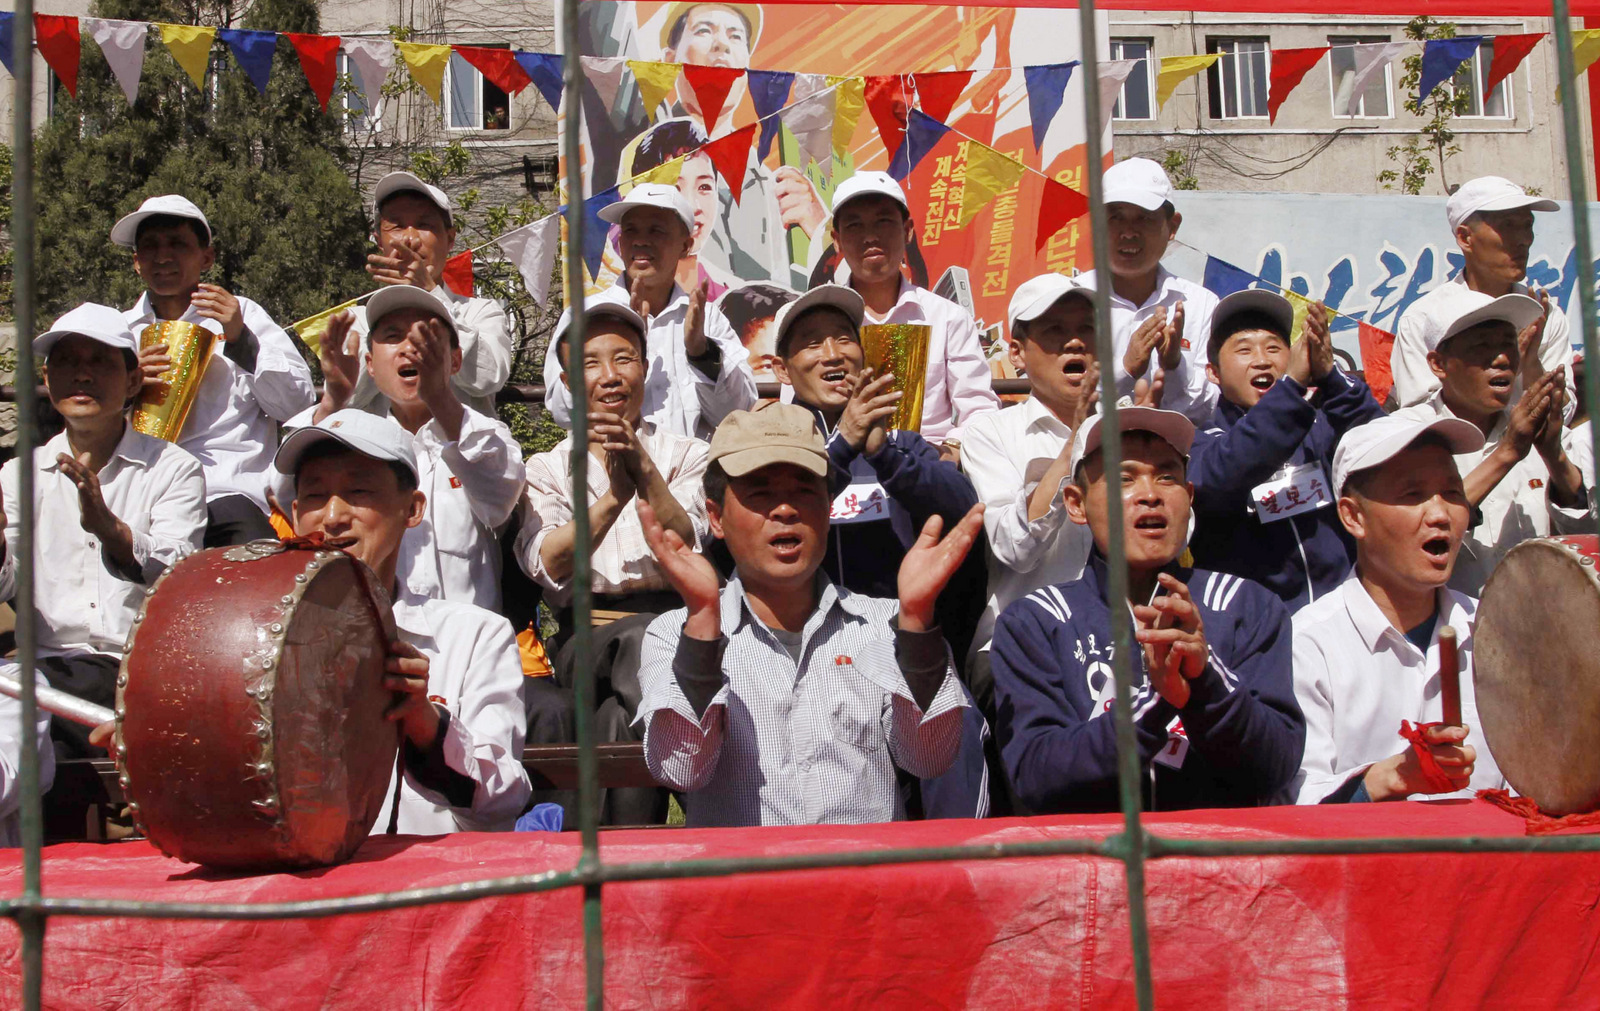 North Korean workers cheer as they celebrate May Day at the Pyongyang Thermal Power Complex in Pyongyang, North Korea, Monday, May 1, 2017. International Workers' Day, which is also known as Labor Day in some countries, is being celebrated worldwide. 